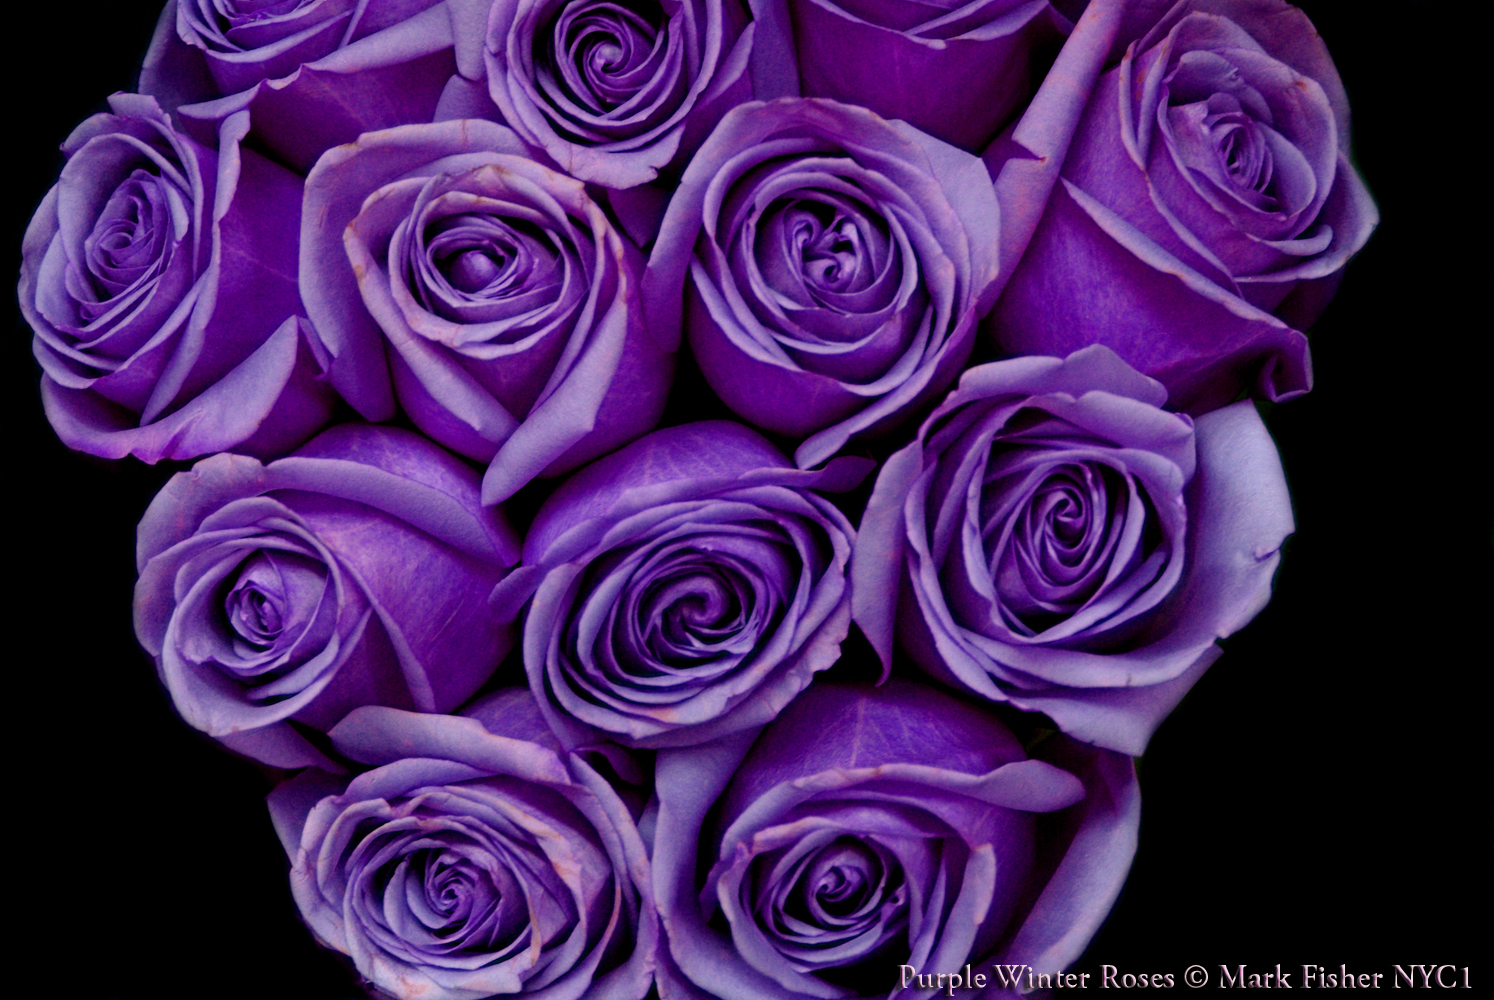 Purple Winter Roses Flowers Design Wallpaper On This Background